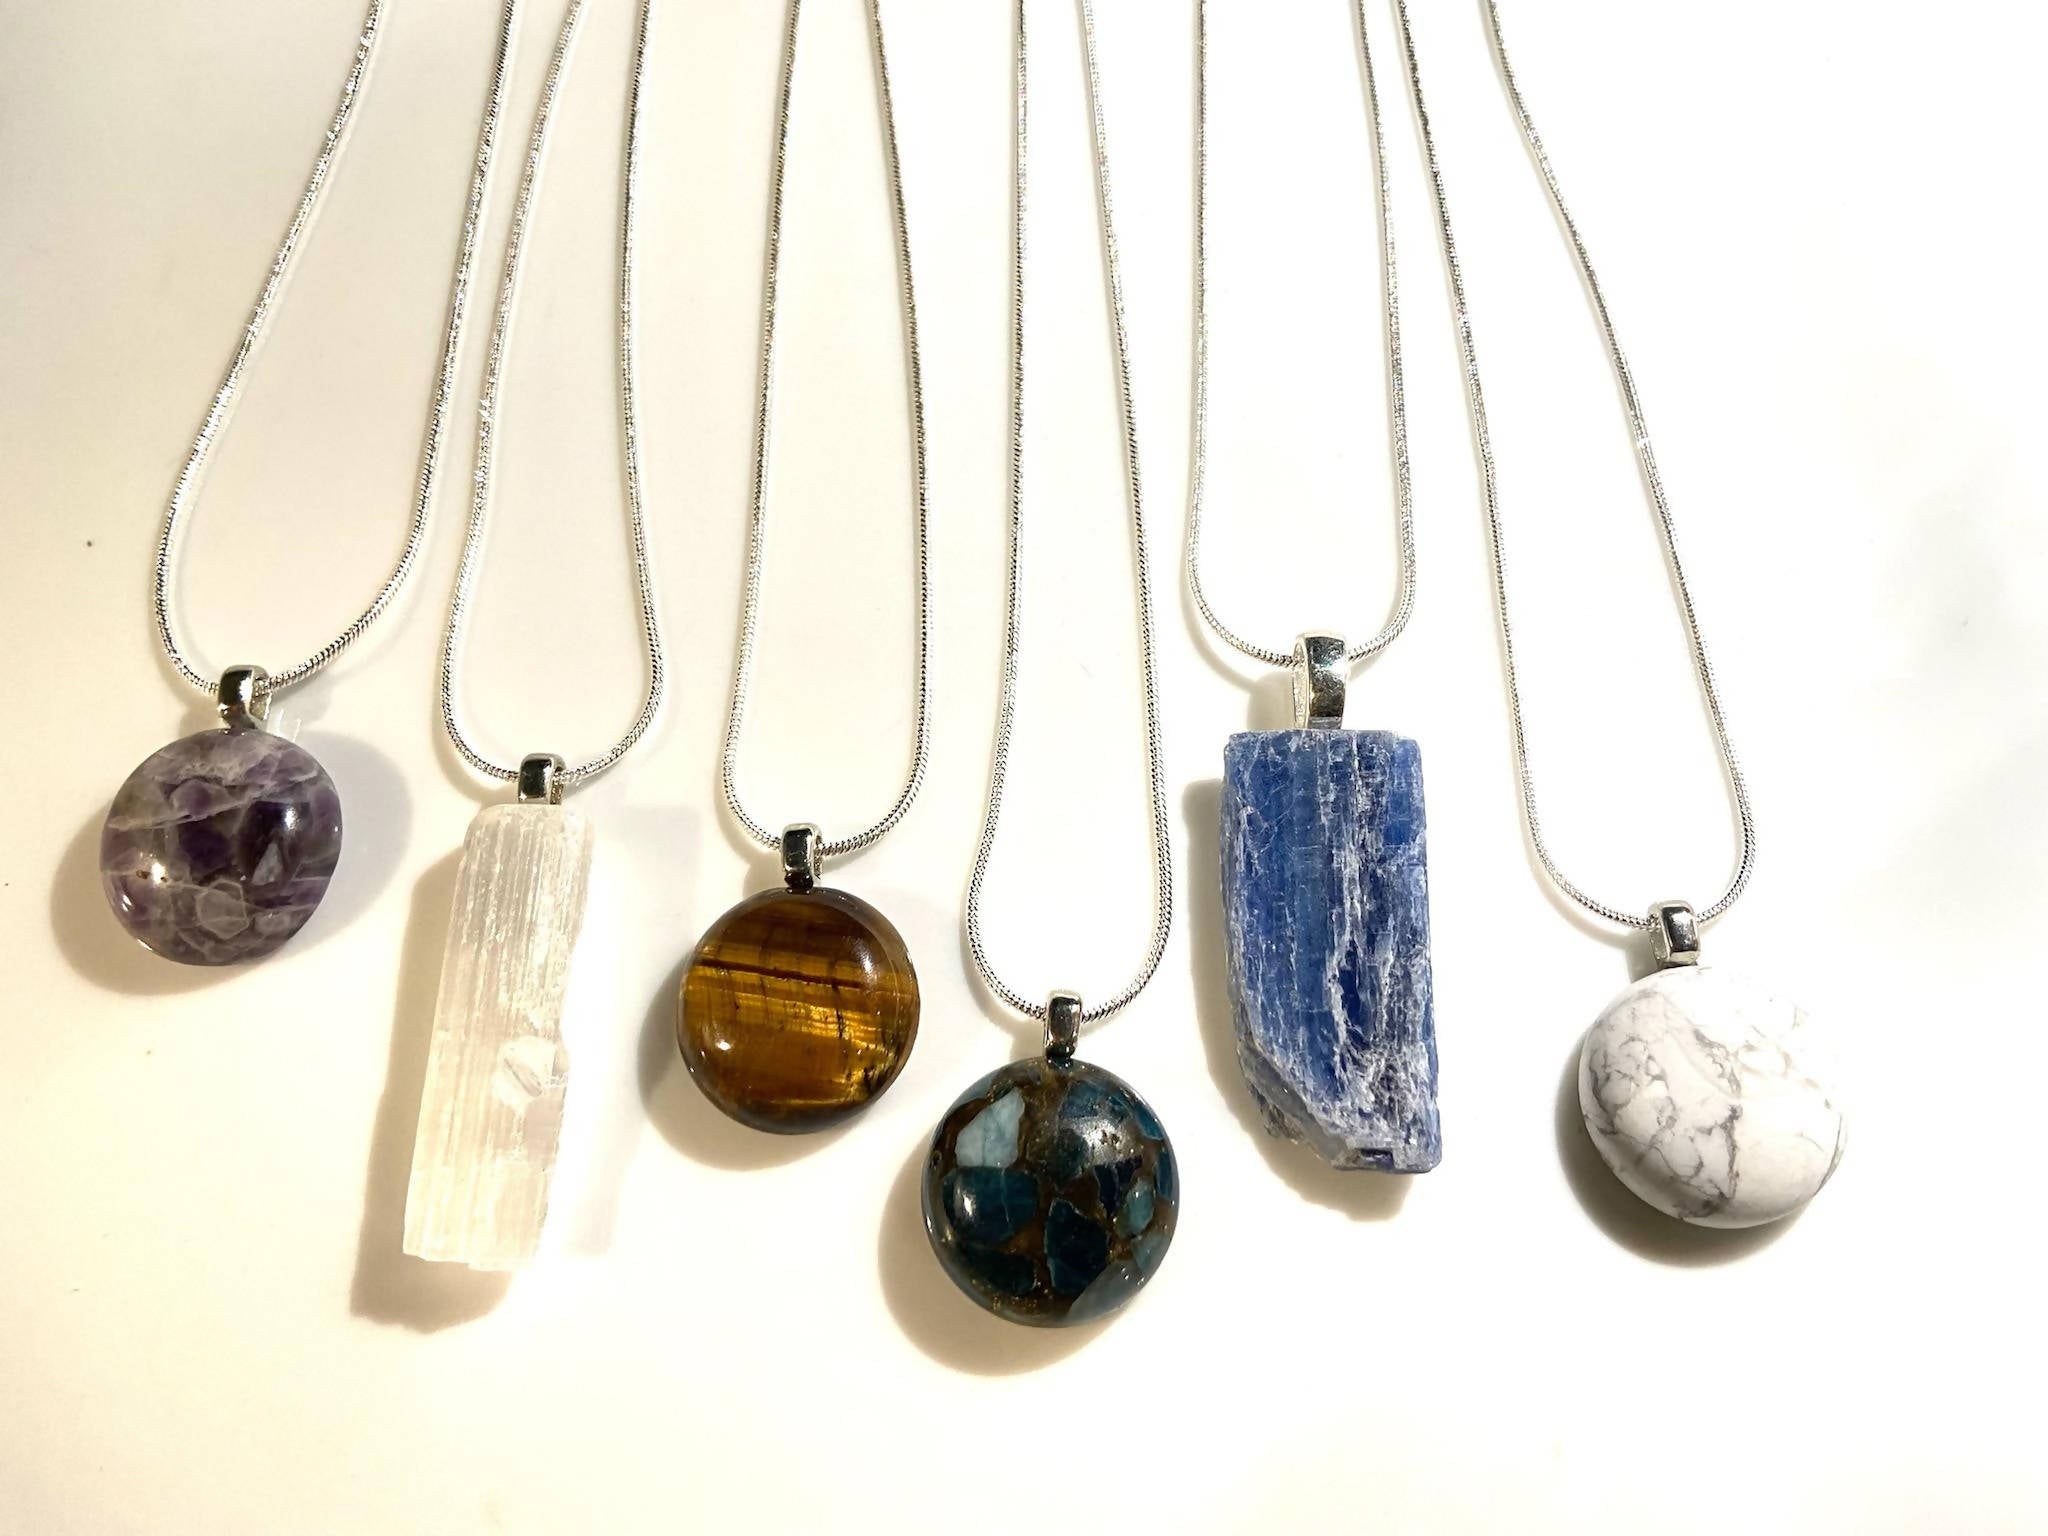 Stone pendant with chain